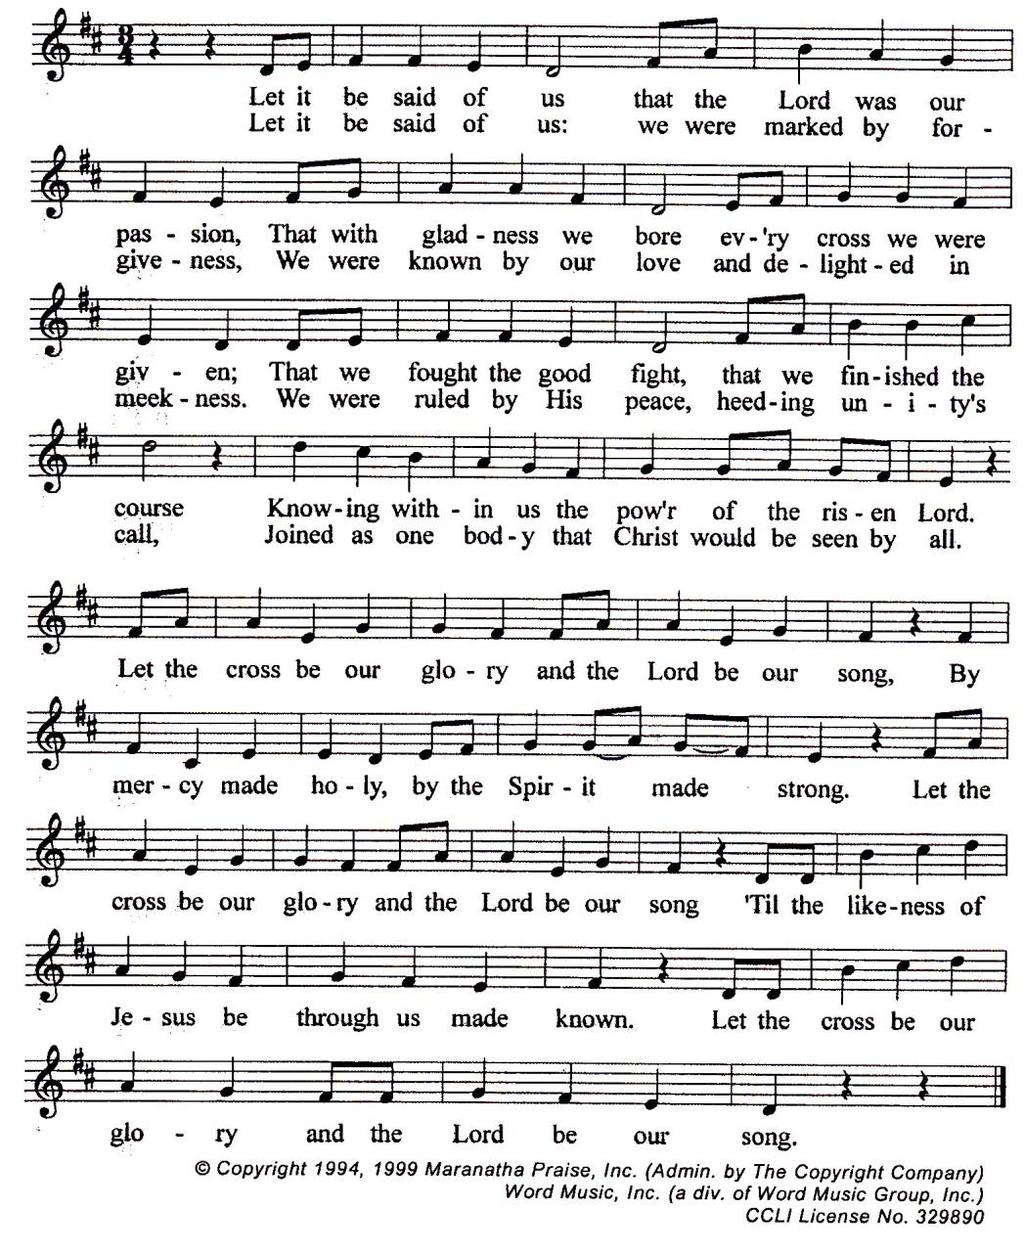 HYMN: Let It Be Said of Us Piano: Linda Kothman OFFERING (Please sign and date the Rite of Friendship